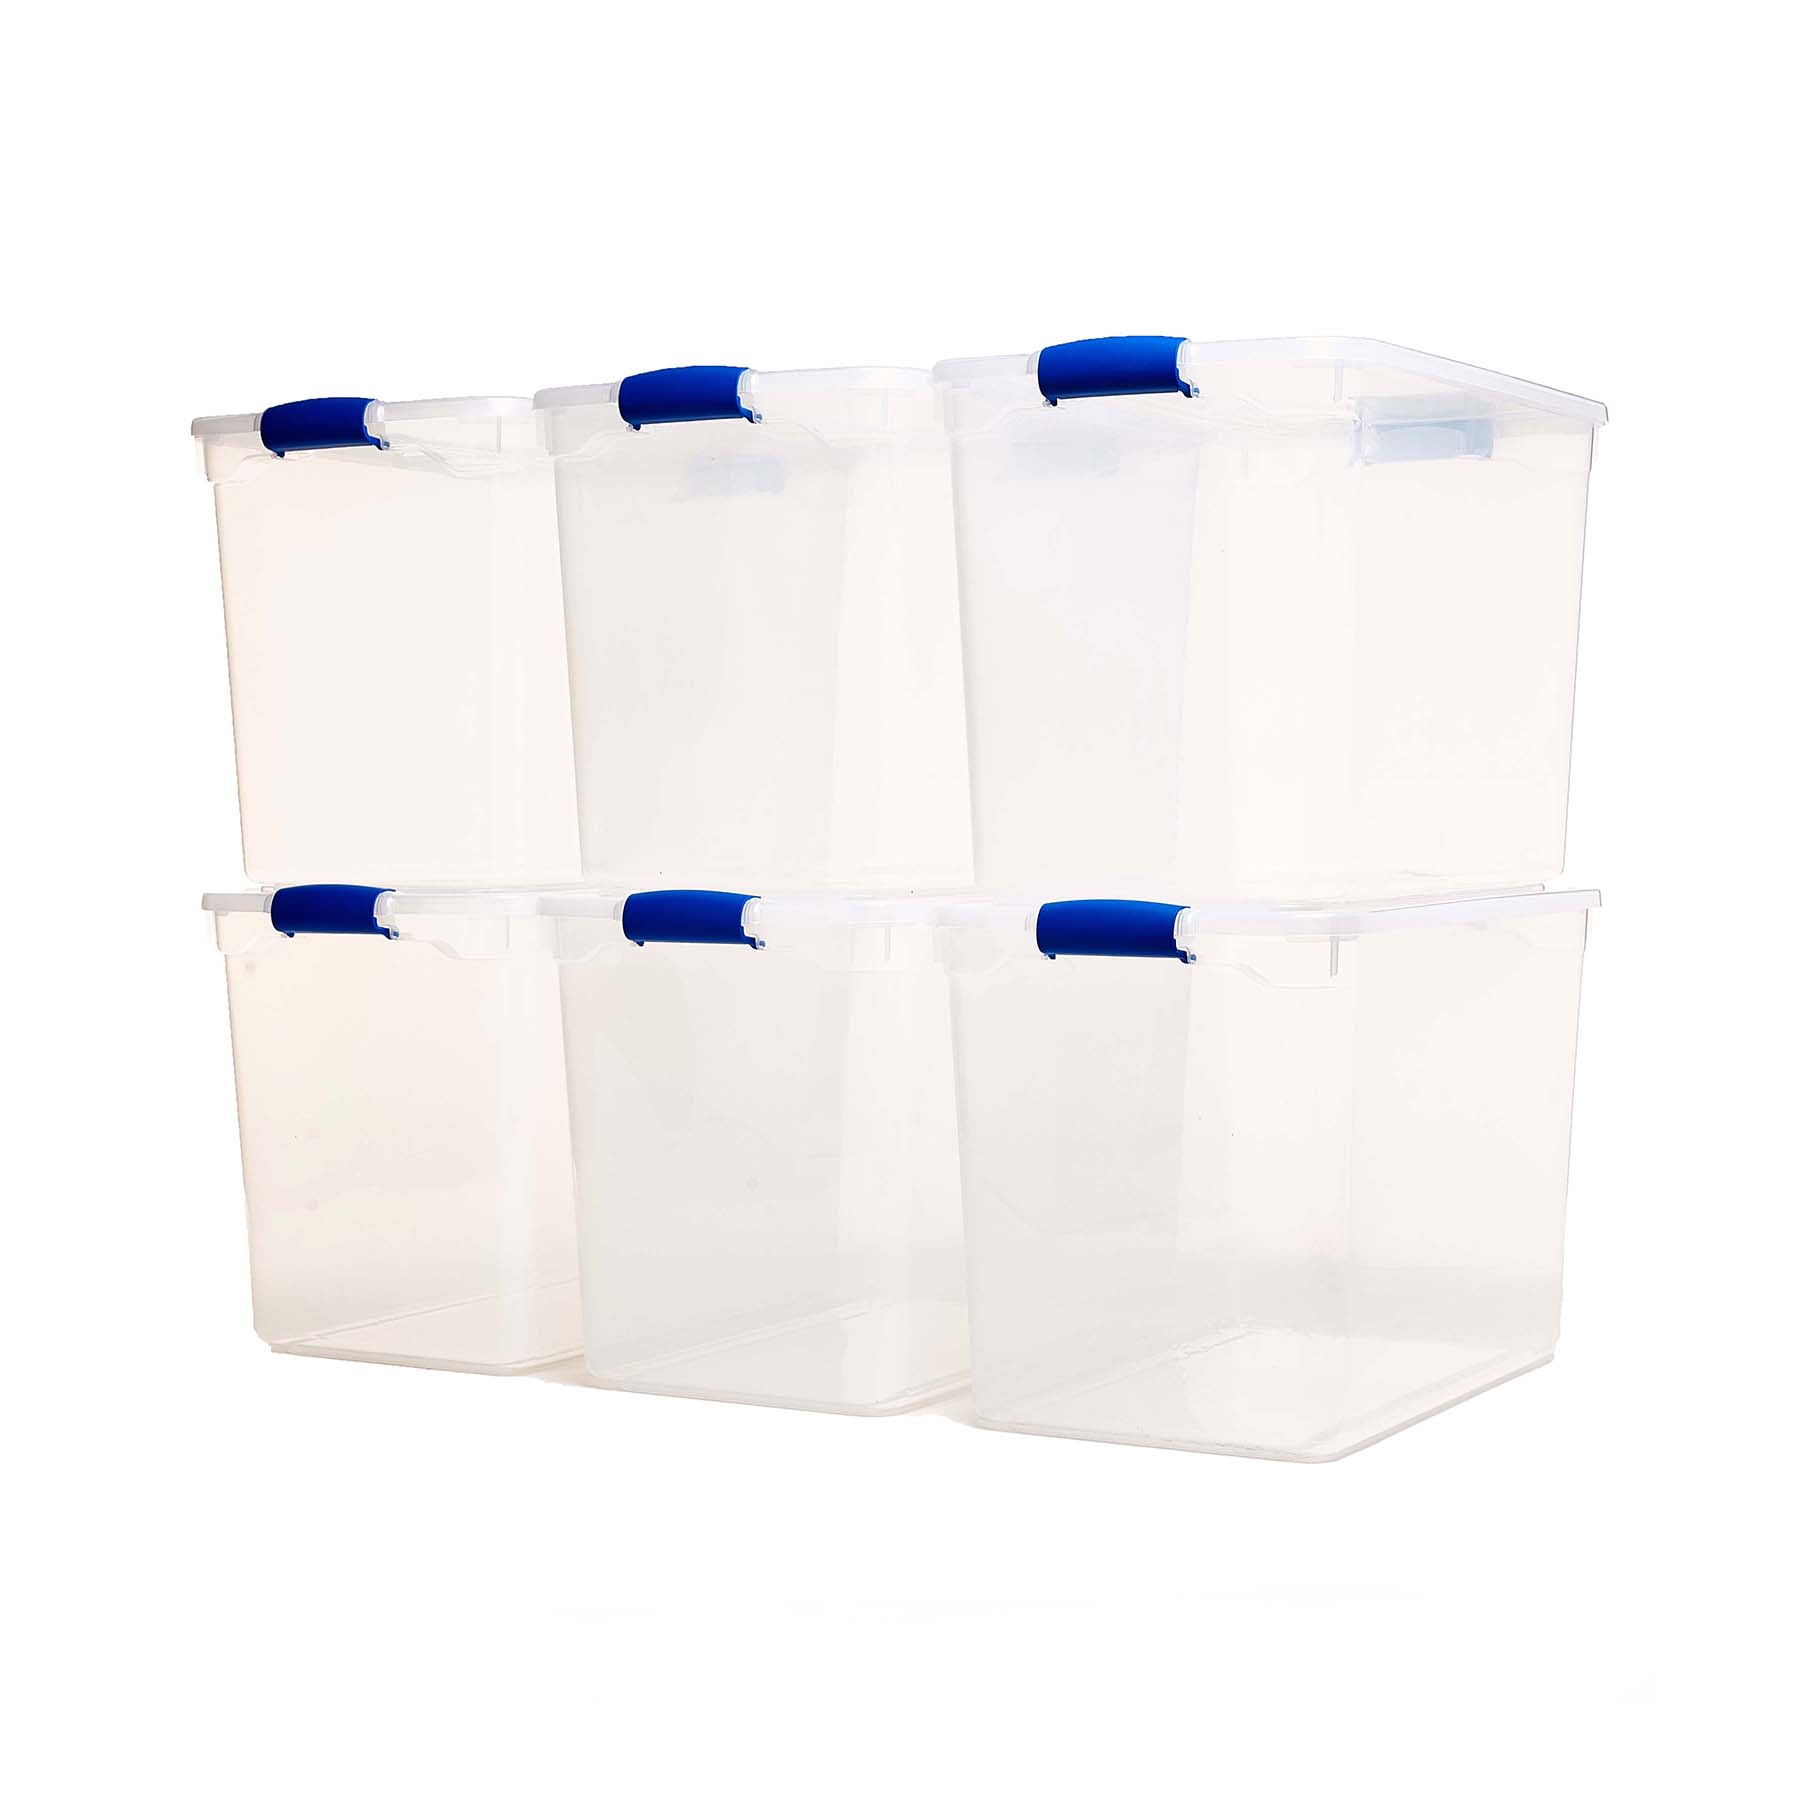 Homz 28 Gallon Stackable Latching Plastic Storage Boxes, Blue and Clear, 6 Count - image 2 of 7